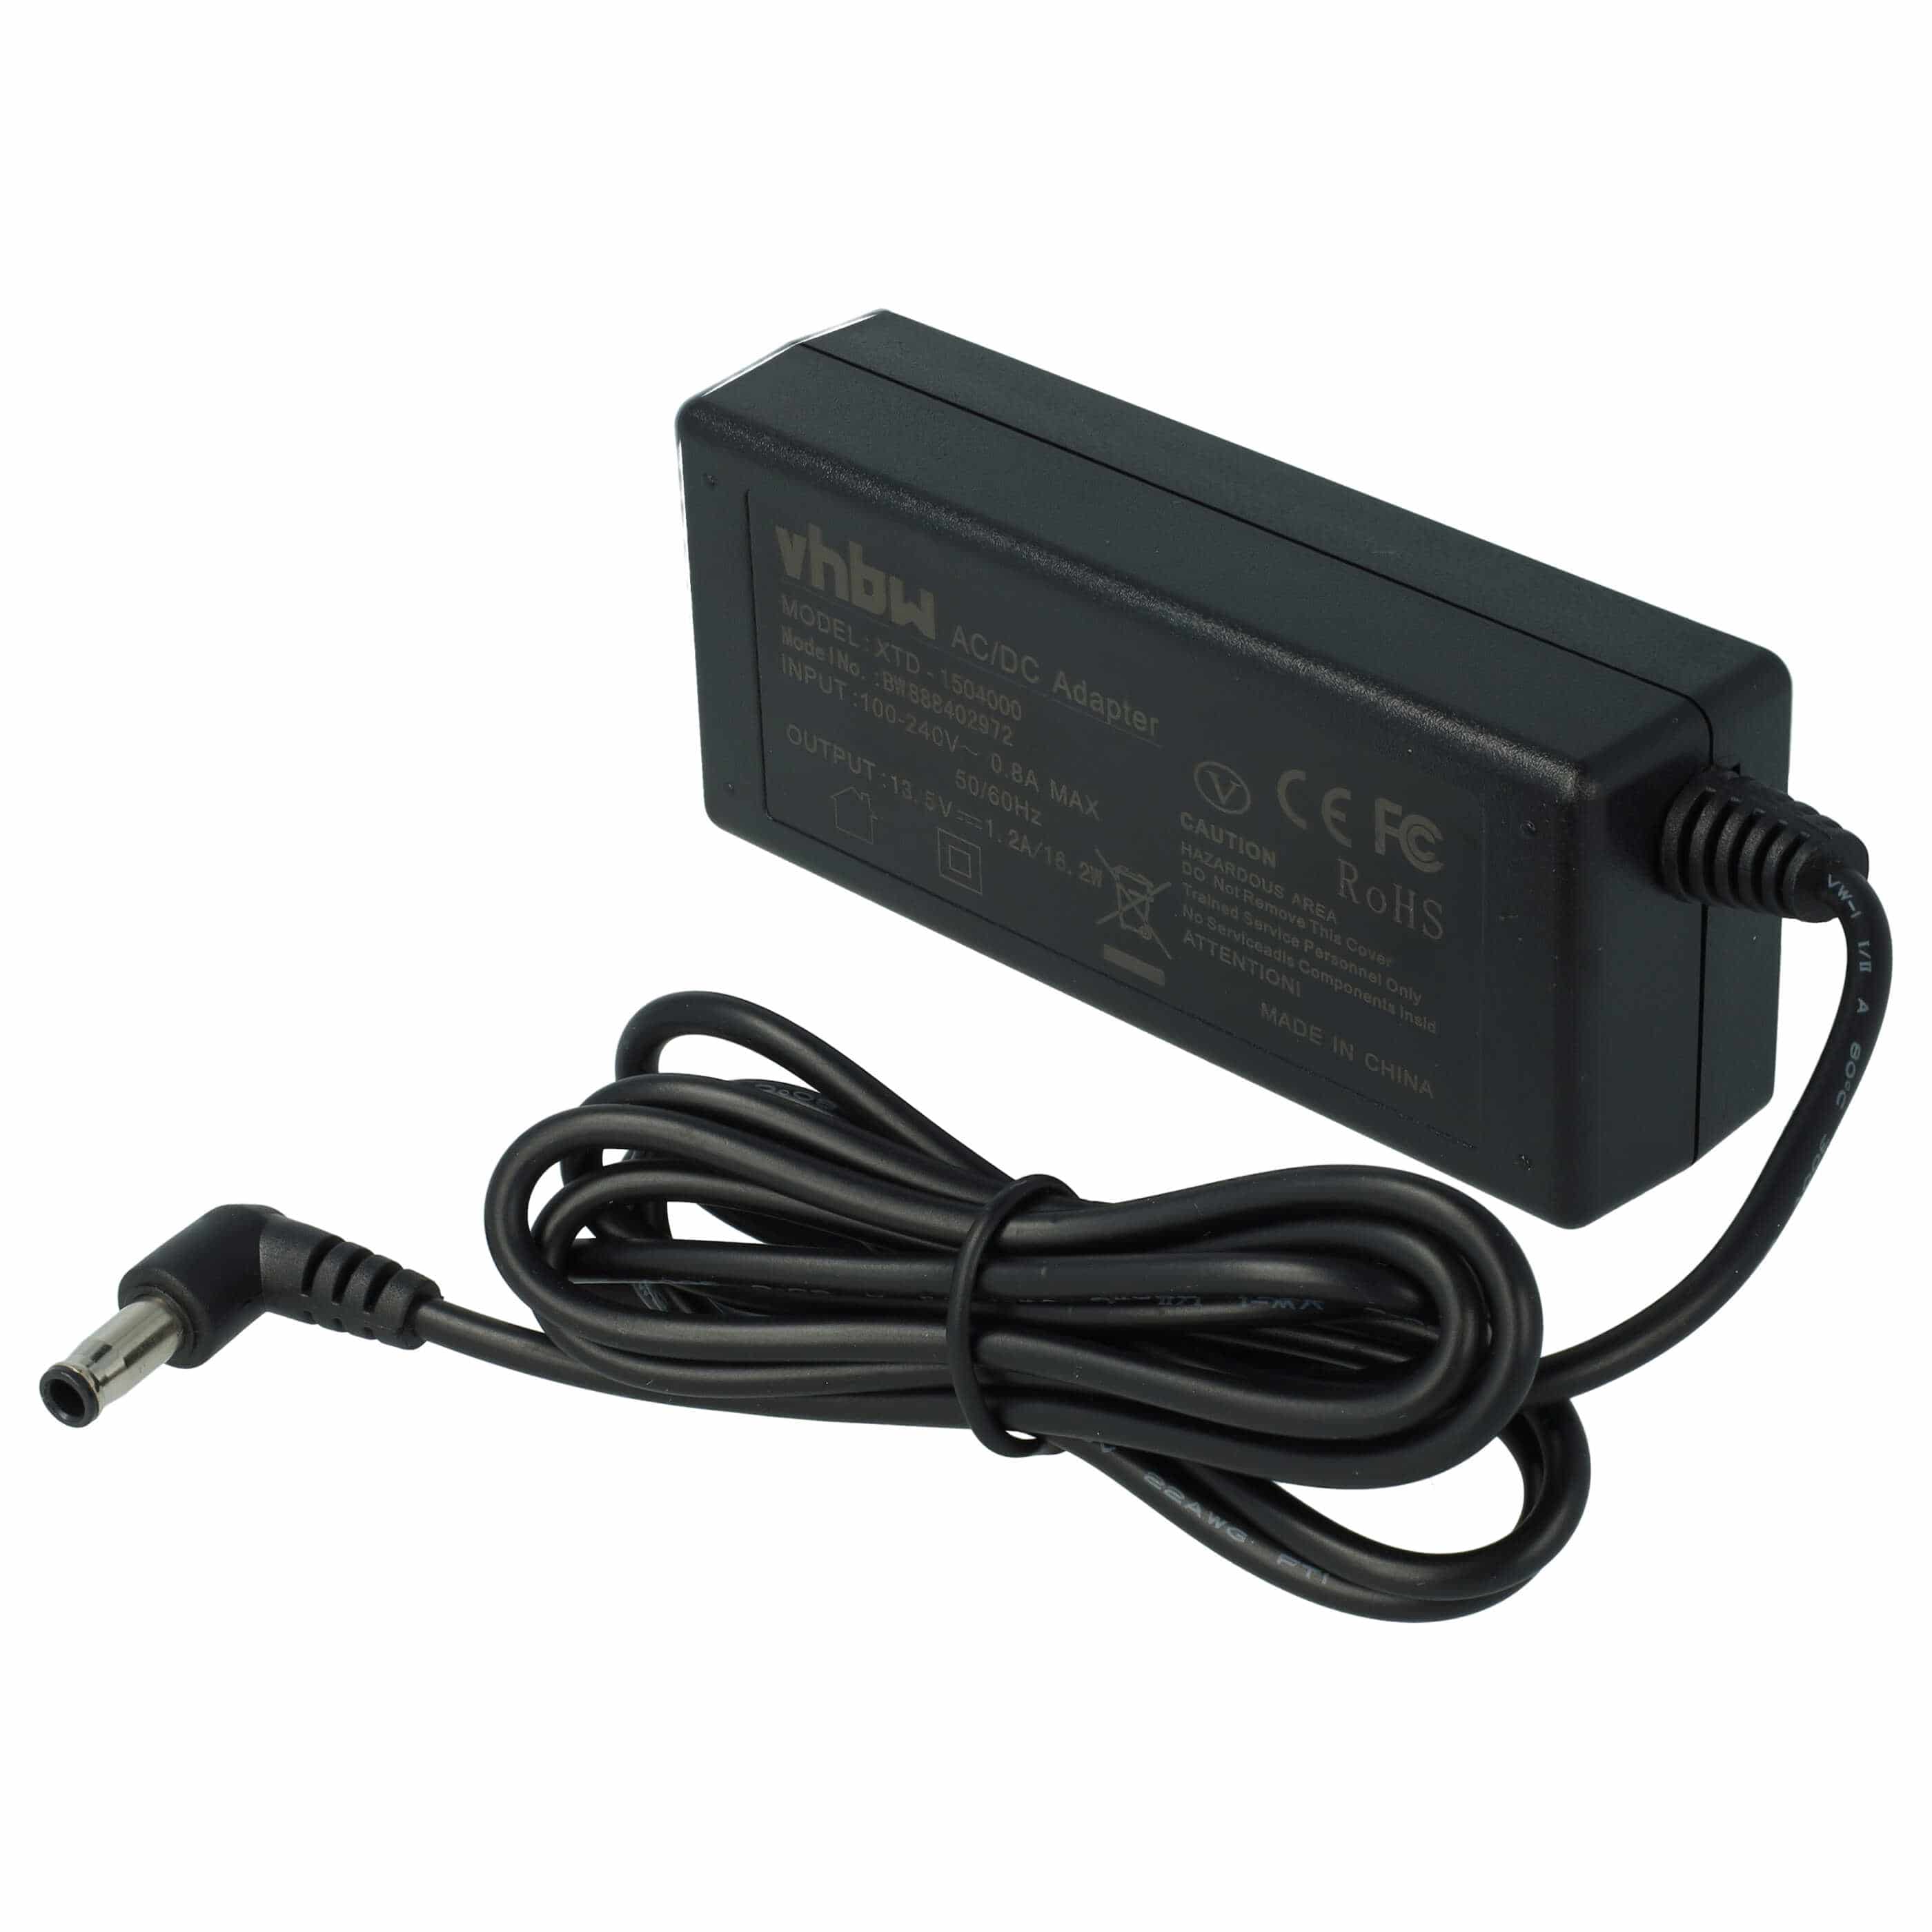 Mains Power Adapter replaces Epson 2116217-00, A391AR, A391AS, A391BS, A391GB for Epson Scanner - 230 cm